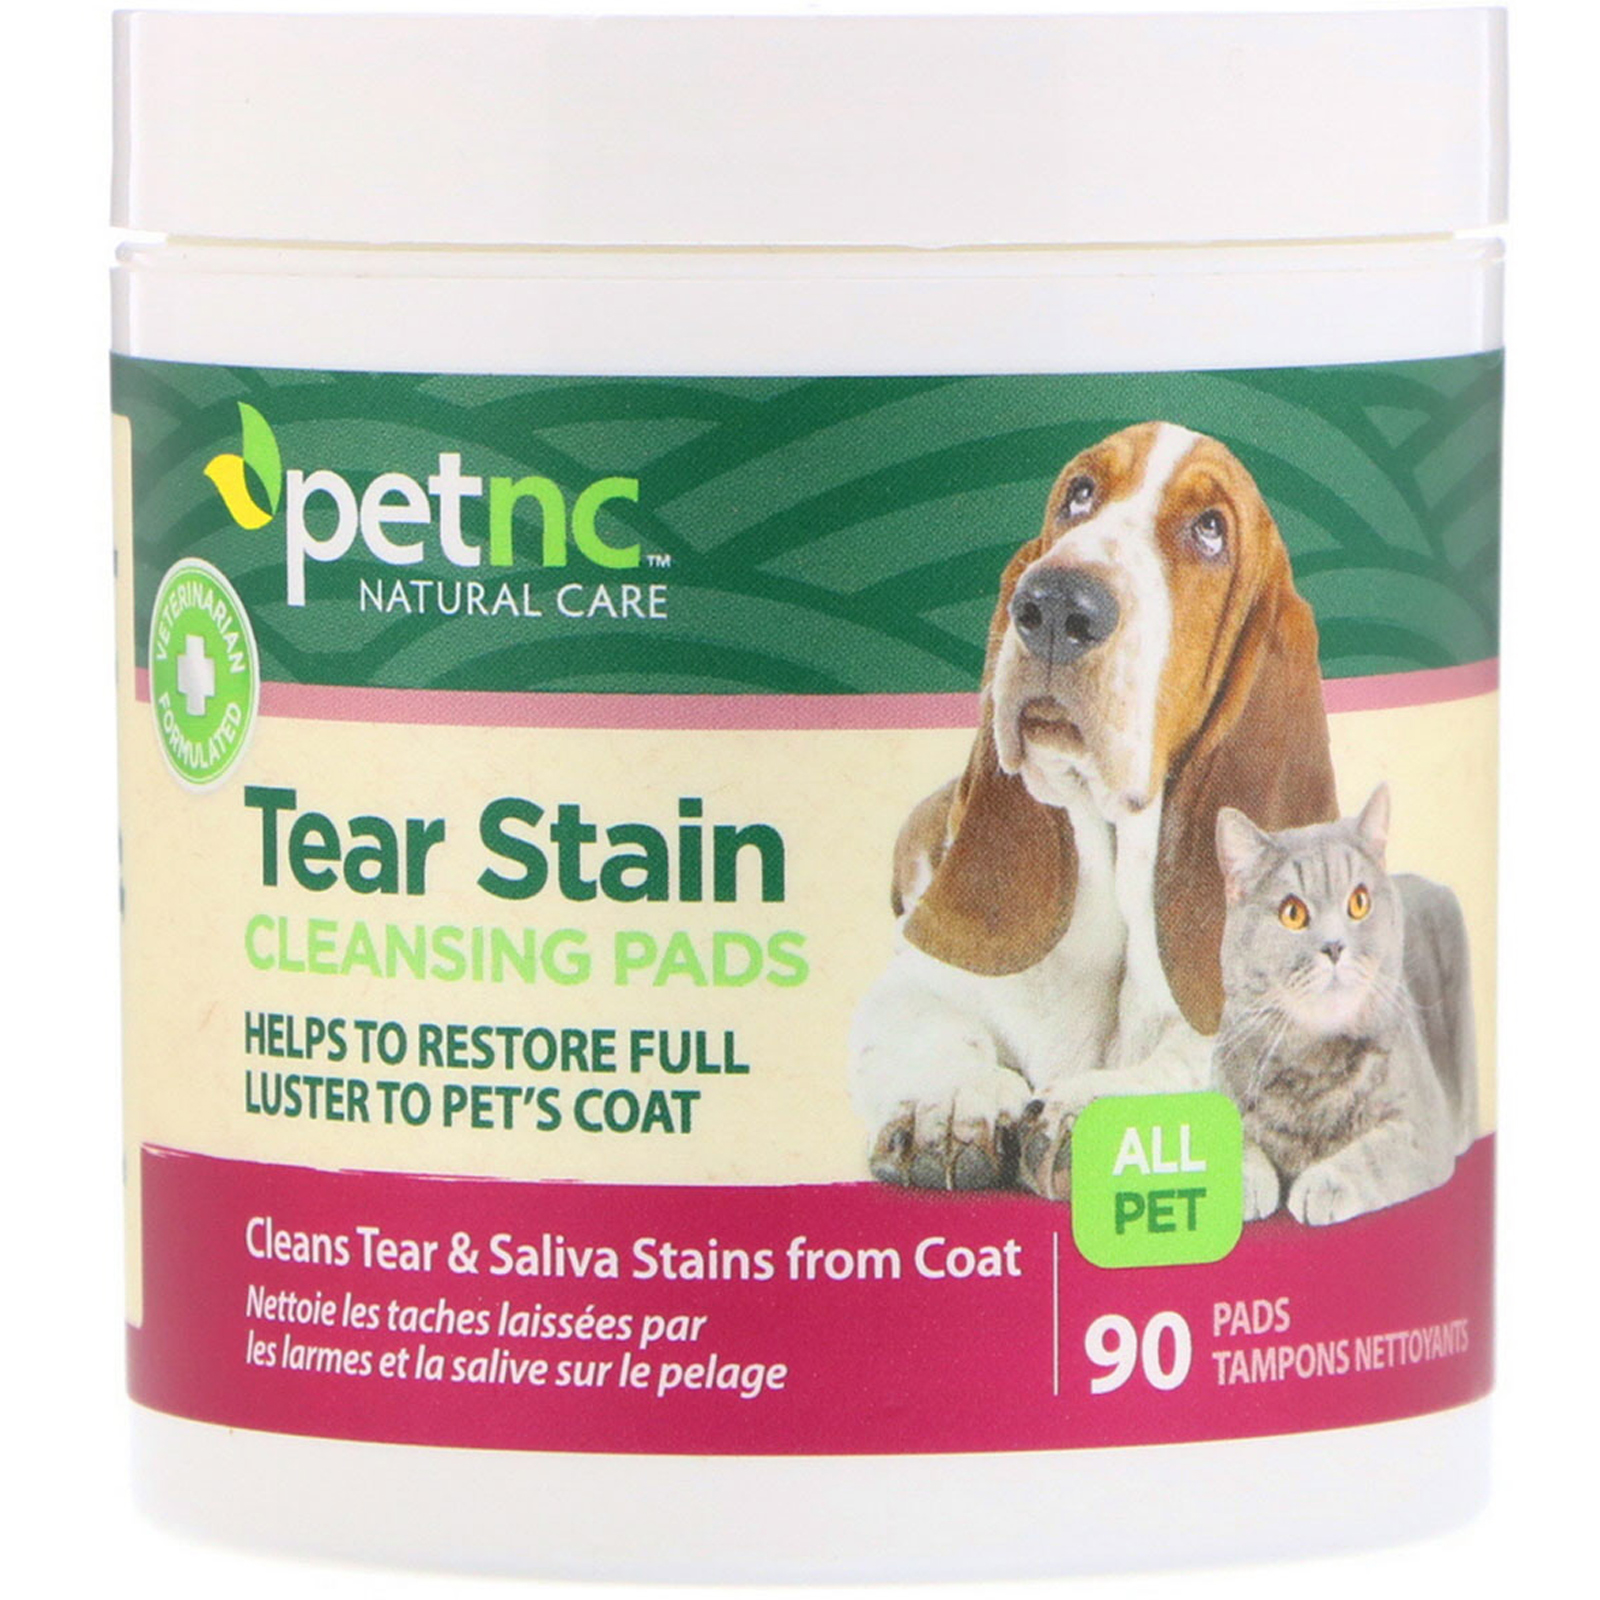 petnc NATURAL CARE, Tear Stain Cleansing Pads, For Cats &amp; Dogs, 90 Pads